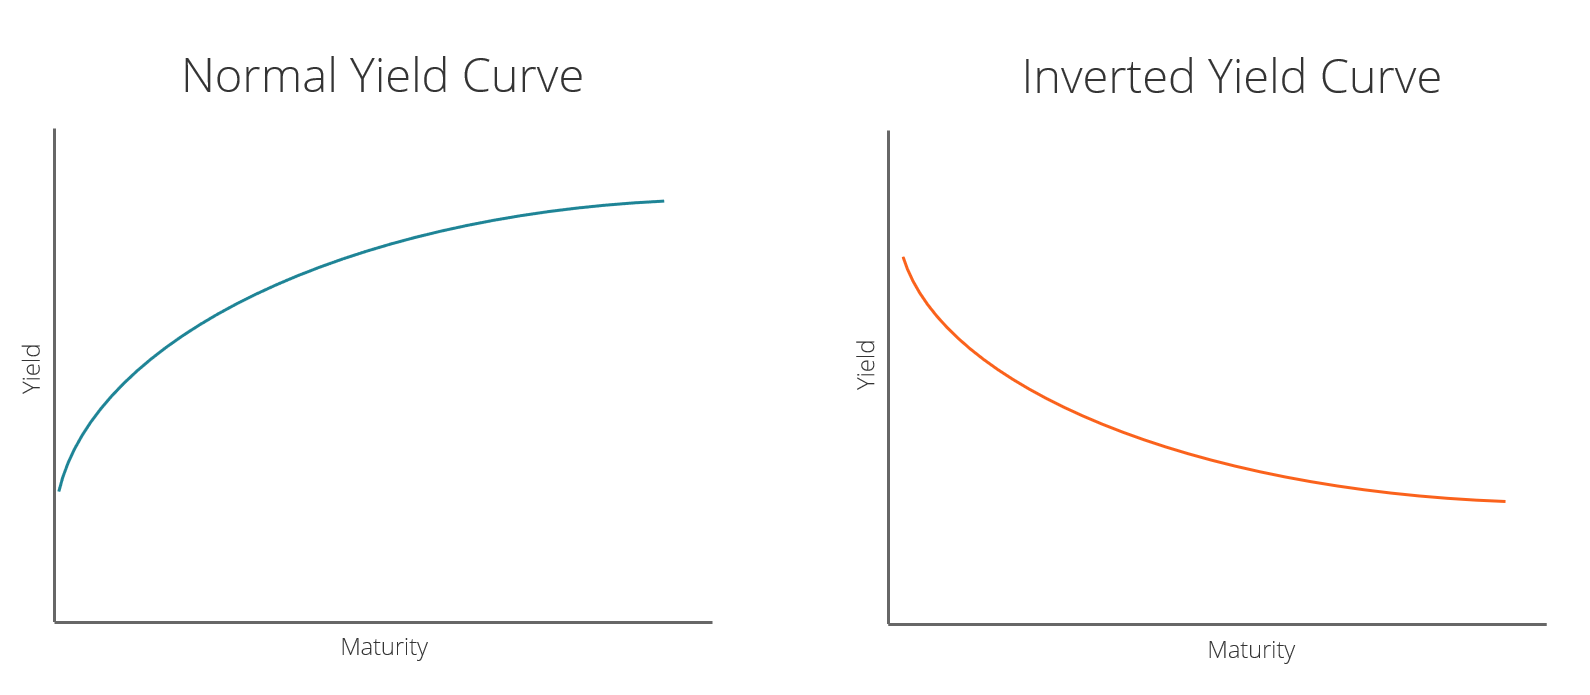 Normal vs Inverted Yield Curve